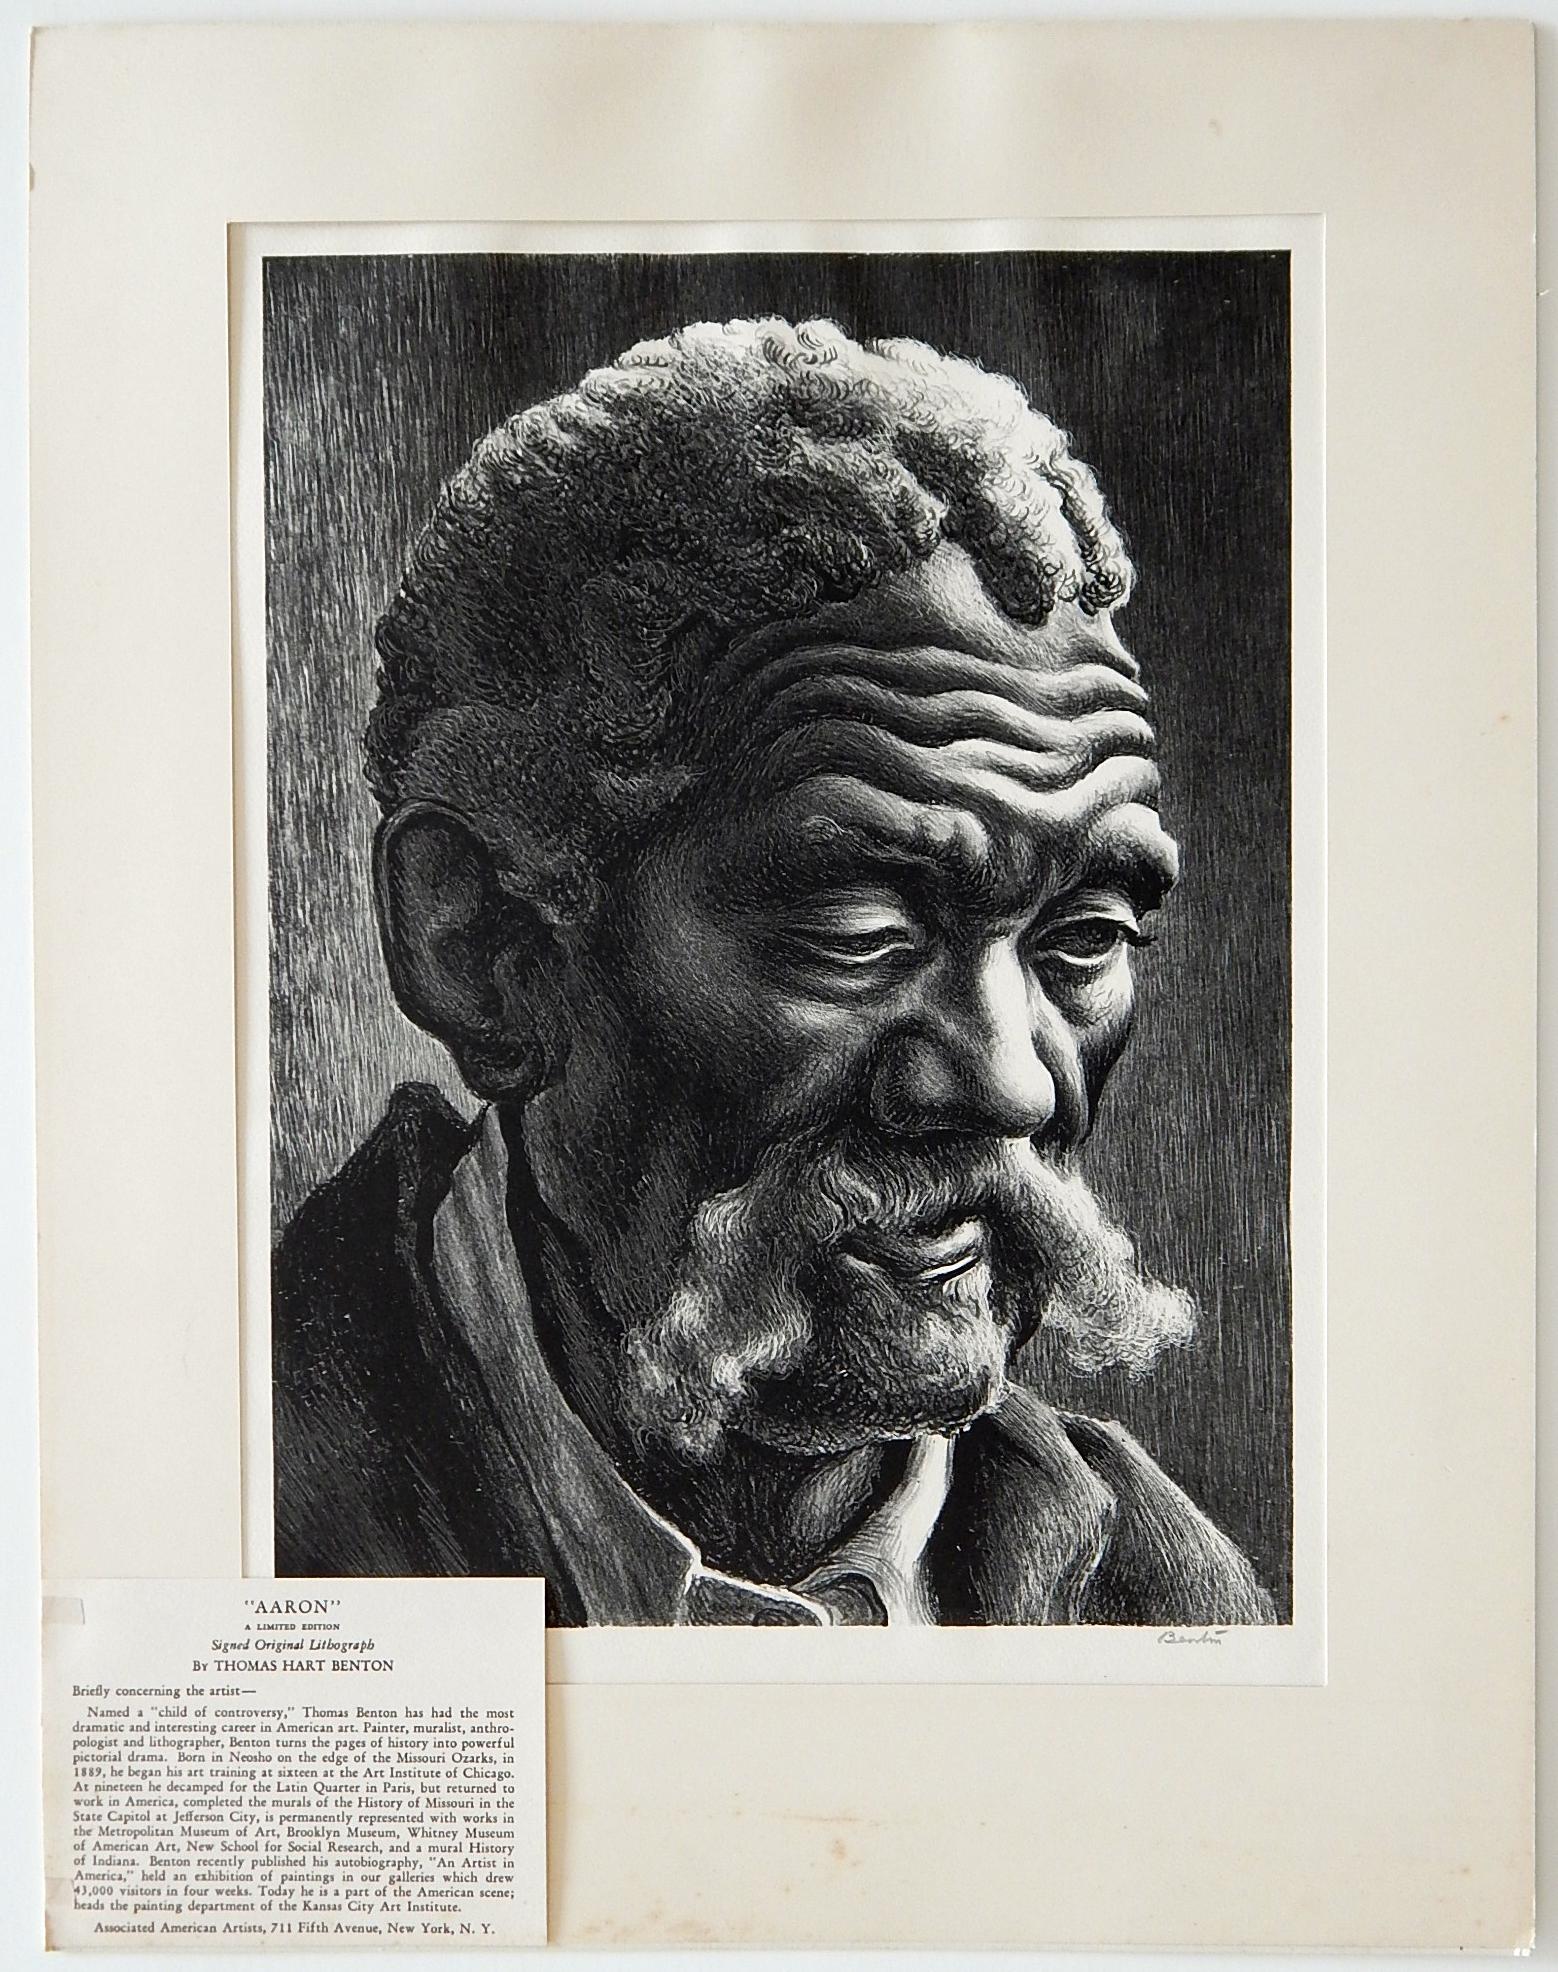 An original stone lithograph in excellent condition by well known Regionalist Thomas Hart Benton, (1889-1975).
Titled: 